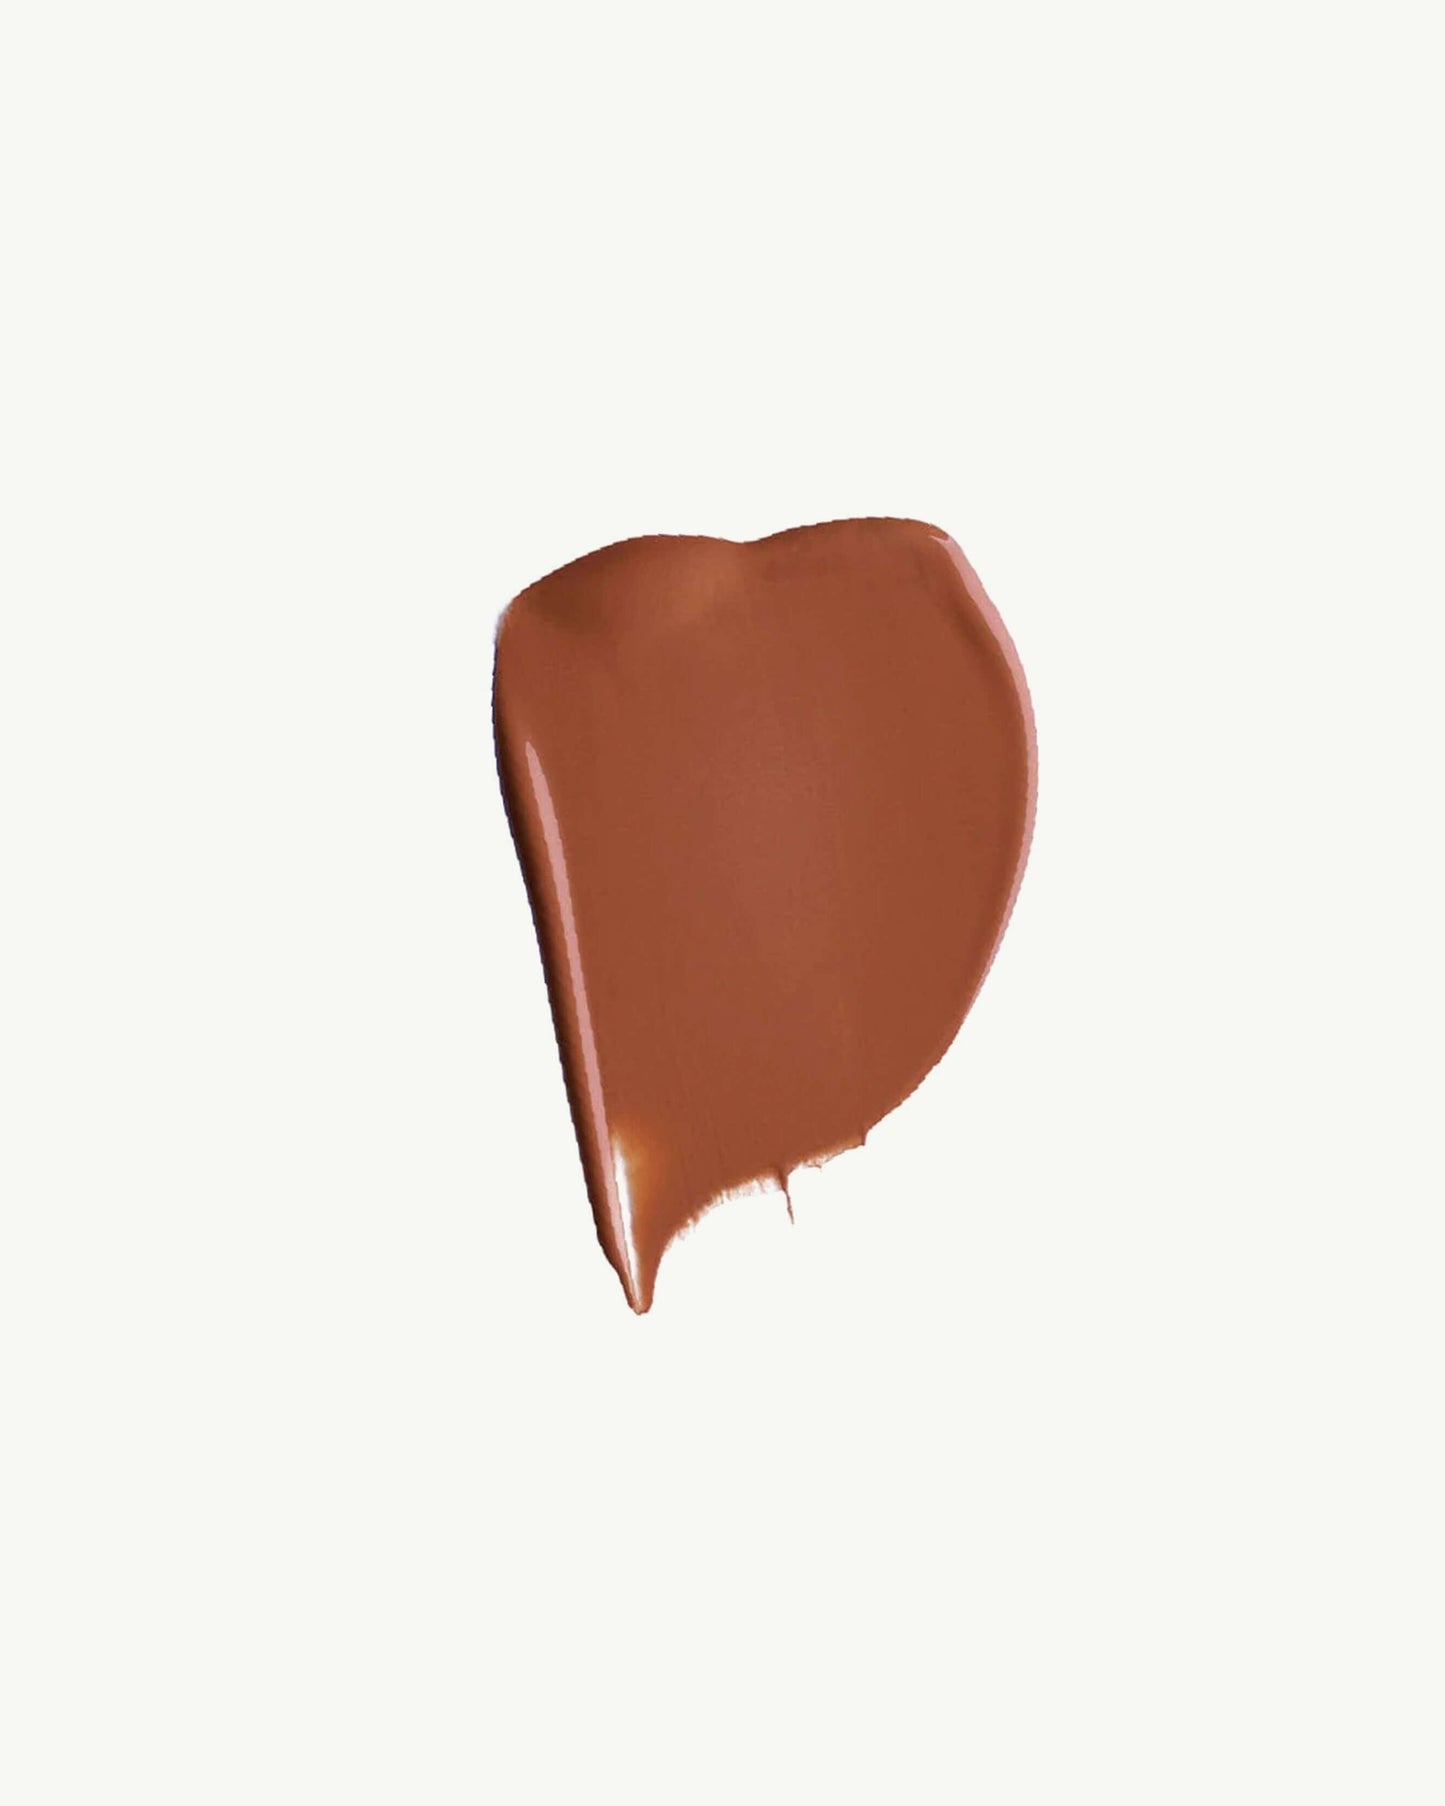 Shade 13 (for deep skin tones with warm-red undertones)